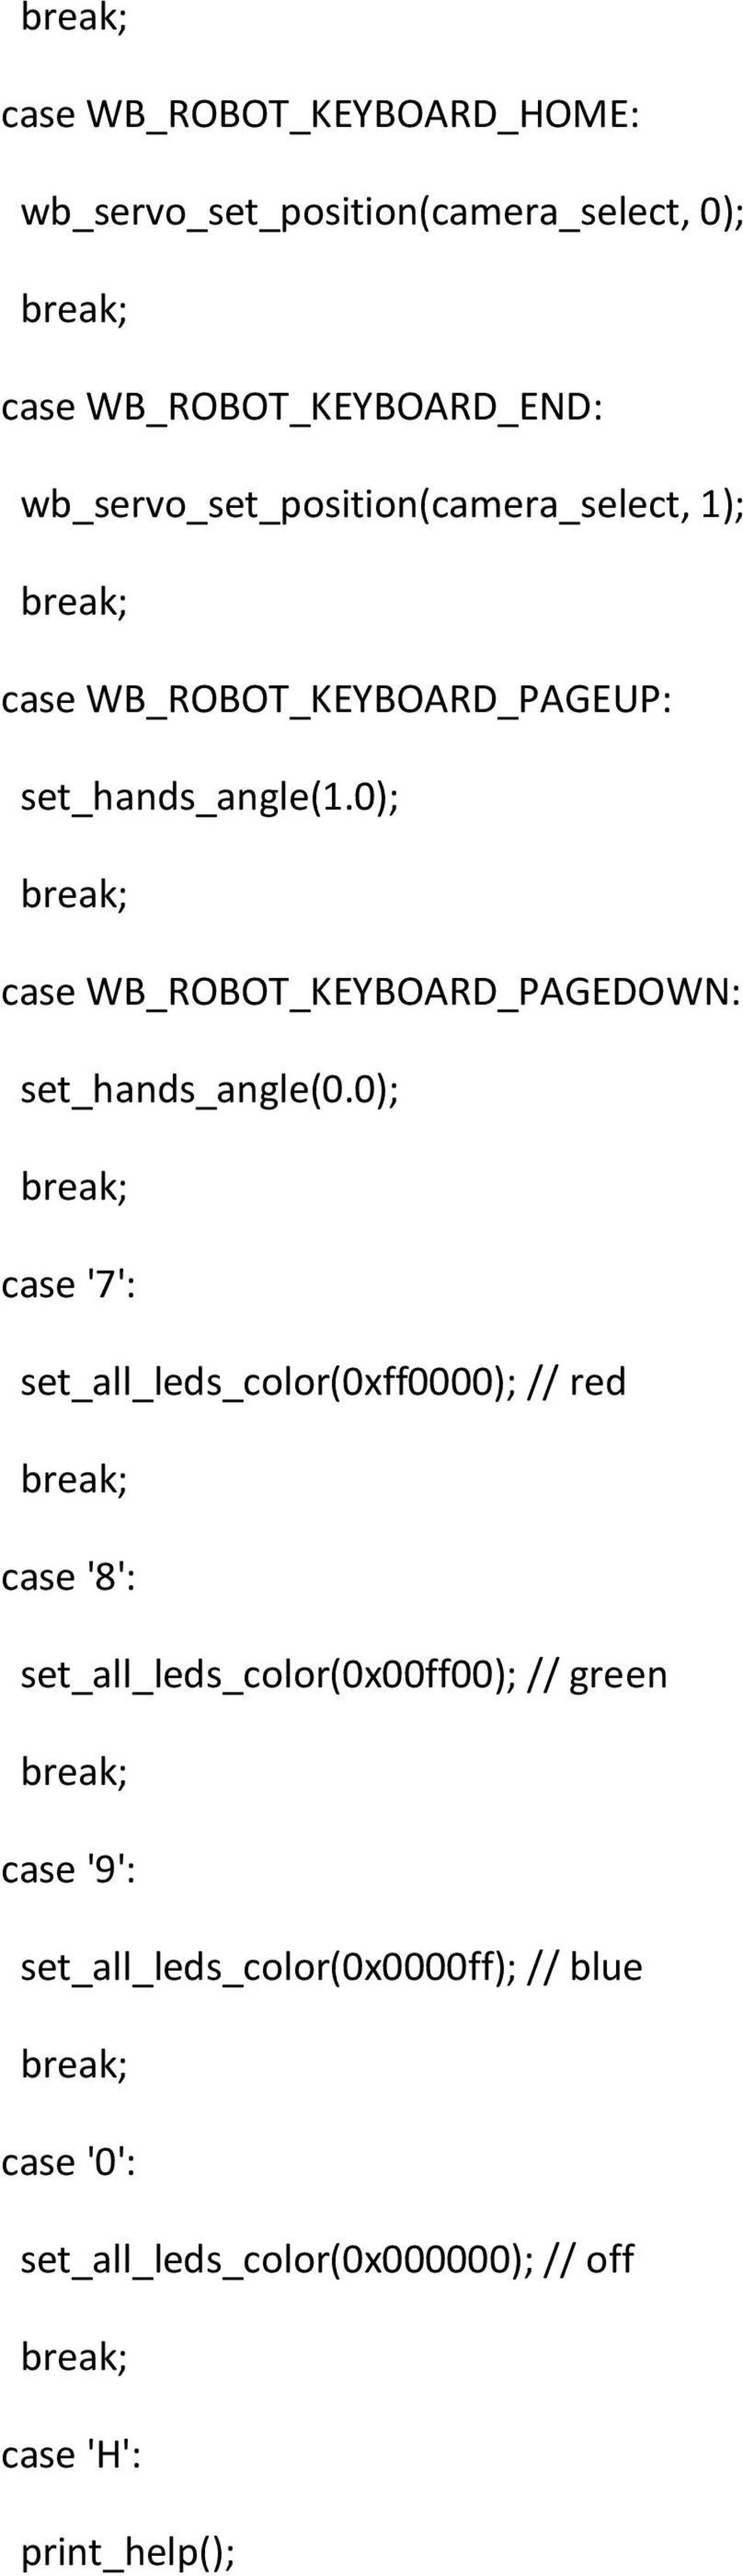 0); case WB_ROBOT_KEYBOARD_PAGEDOWN: set_hands_angle(0.